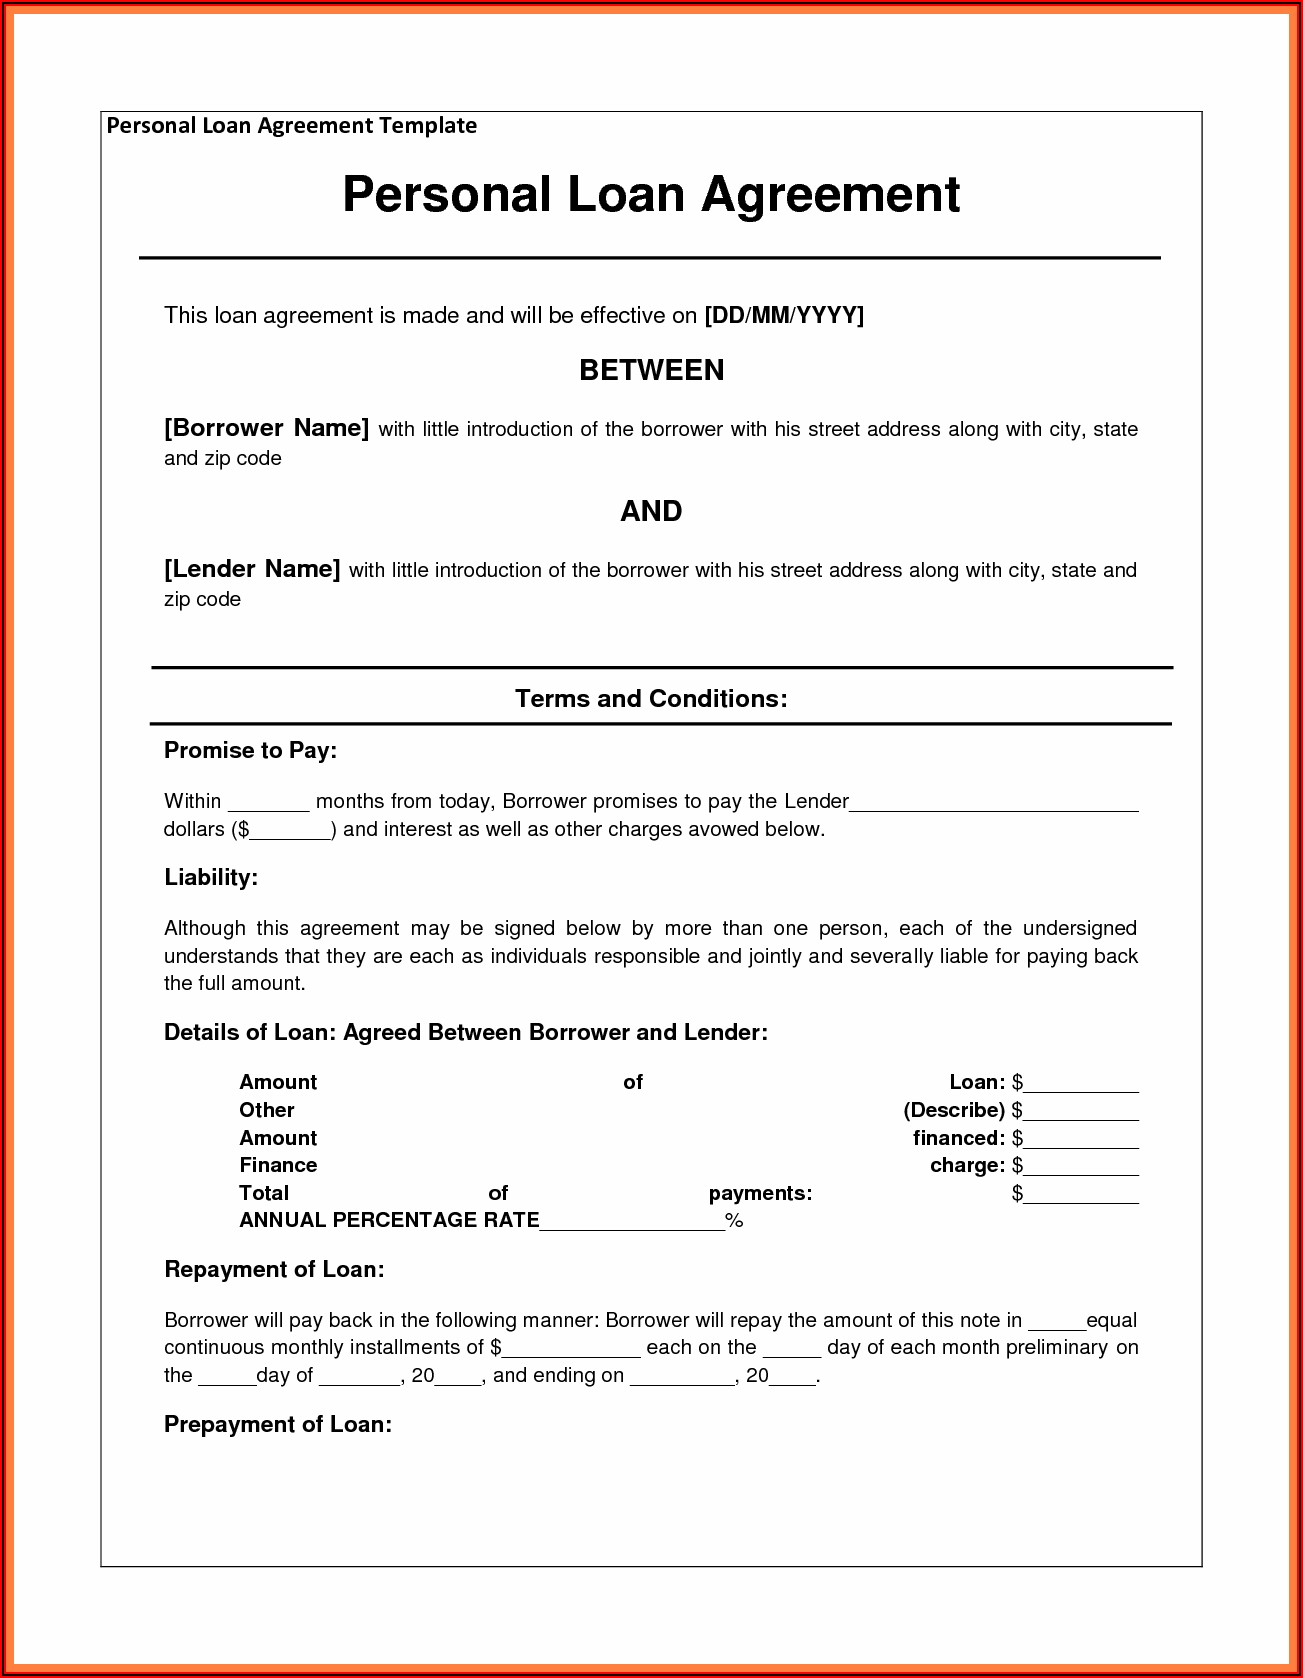 Personal Loan Agreement Template Ms Word